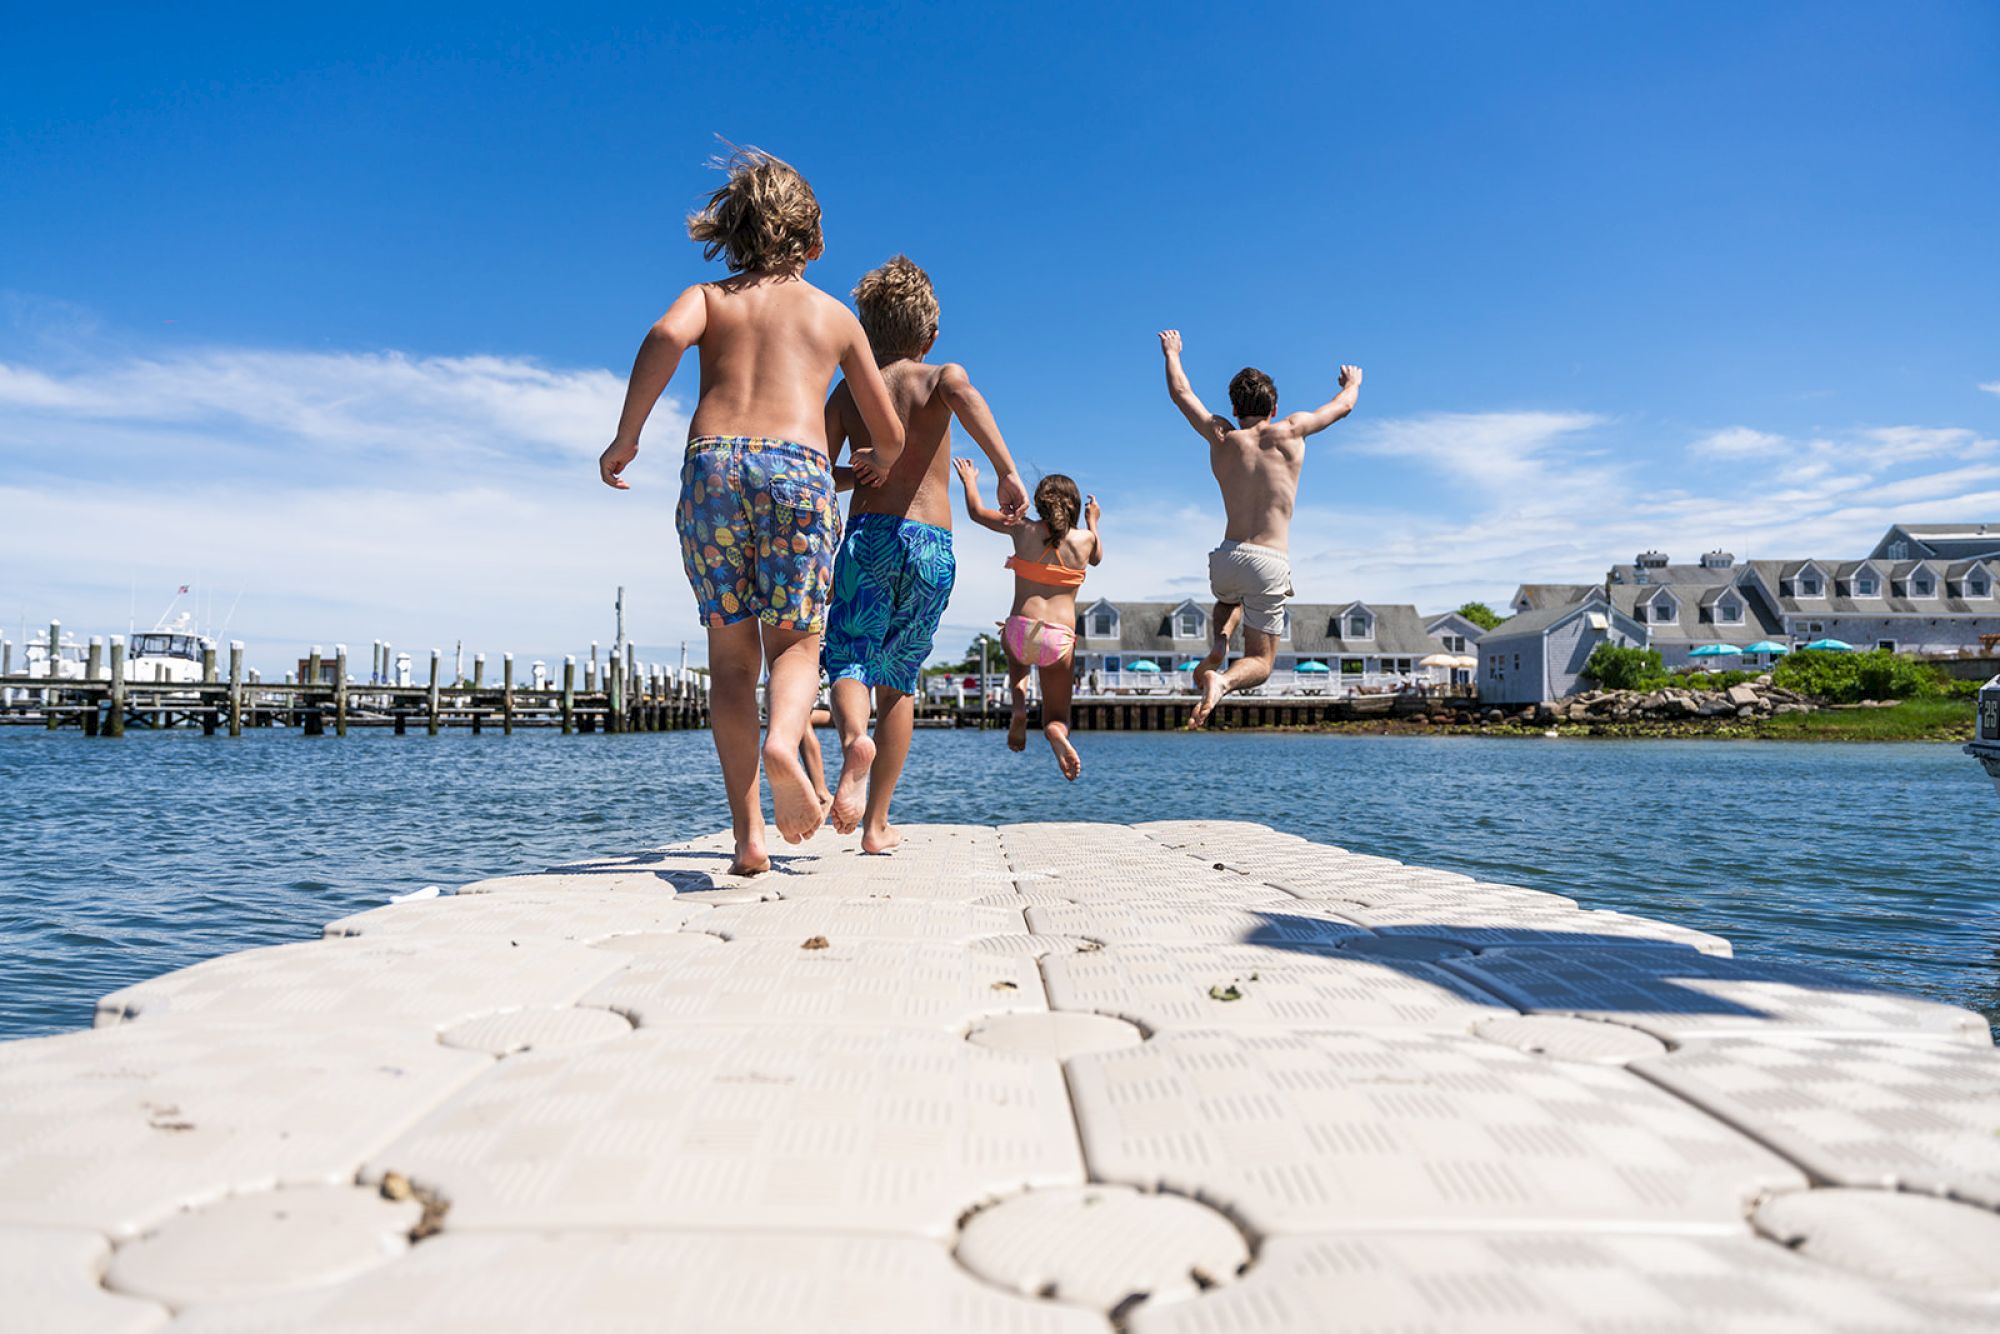 Children running on a dock towards the water, with one jumping in the air, against a backdrop of a marina and buildings under a clear sky.